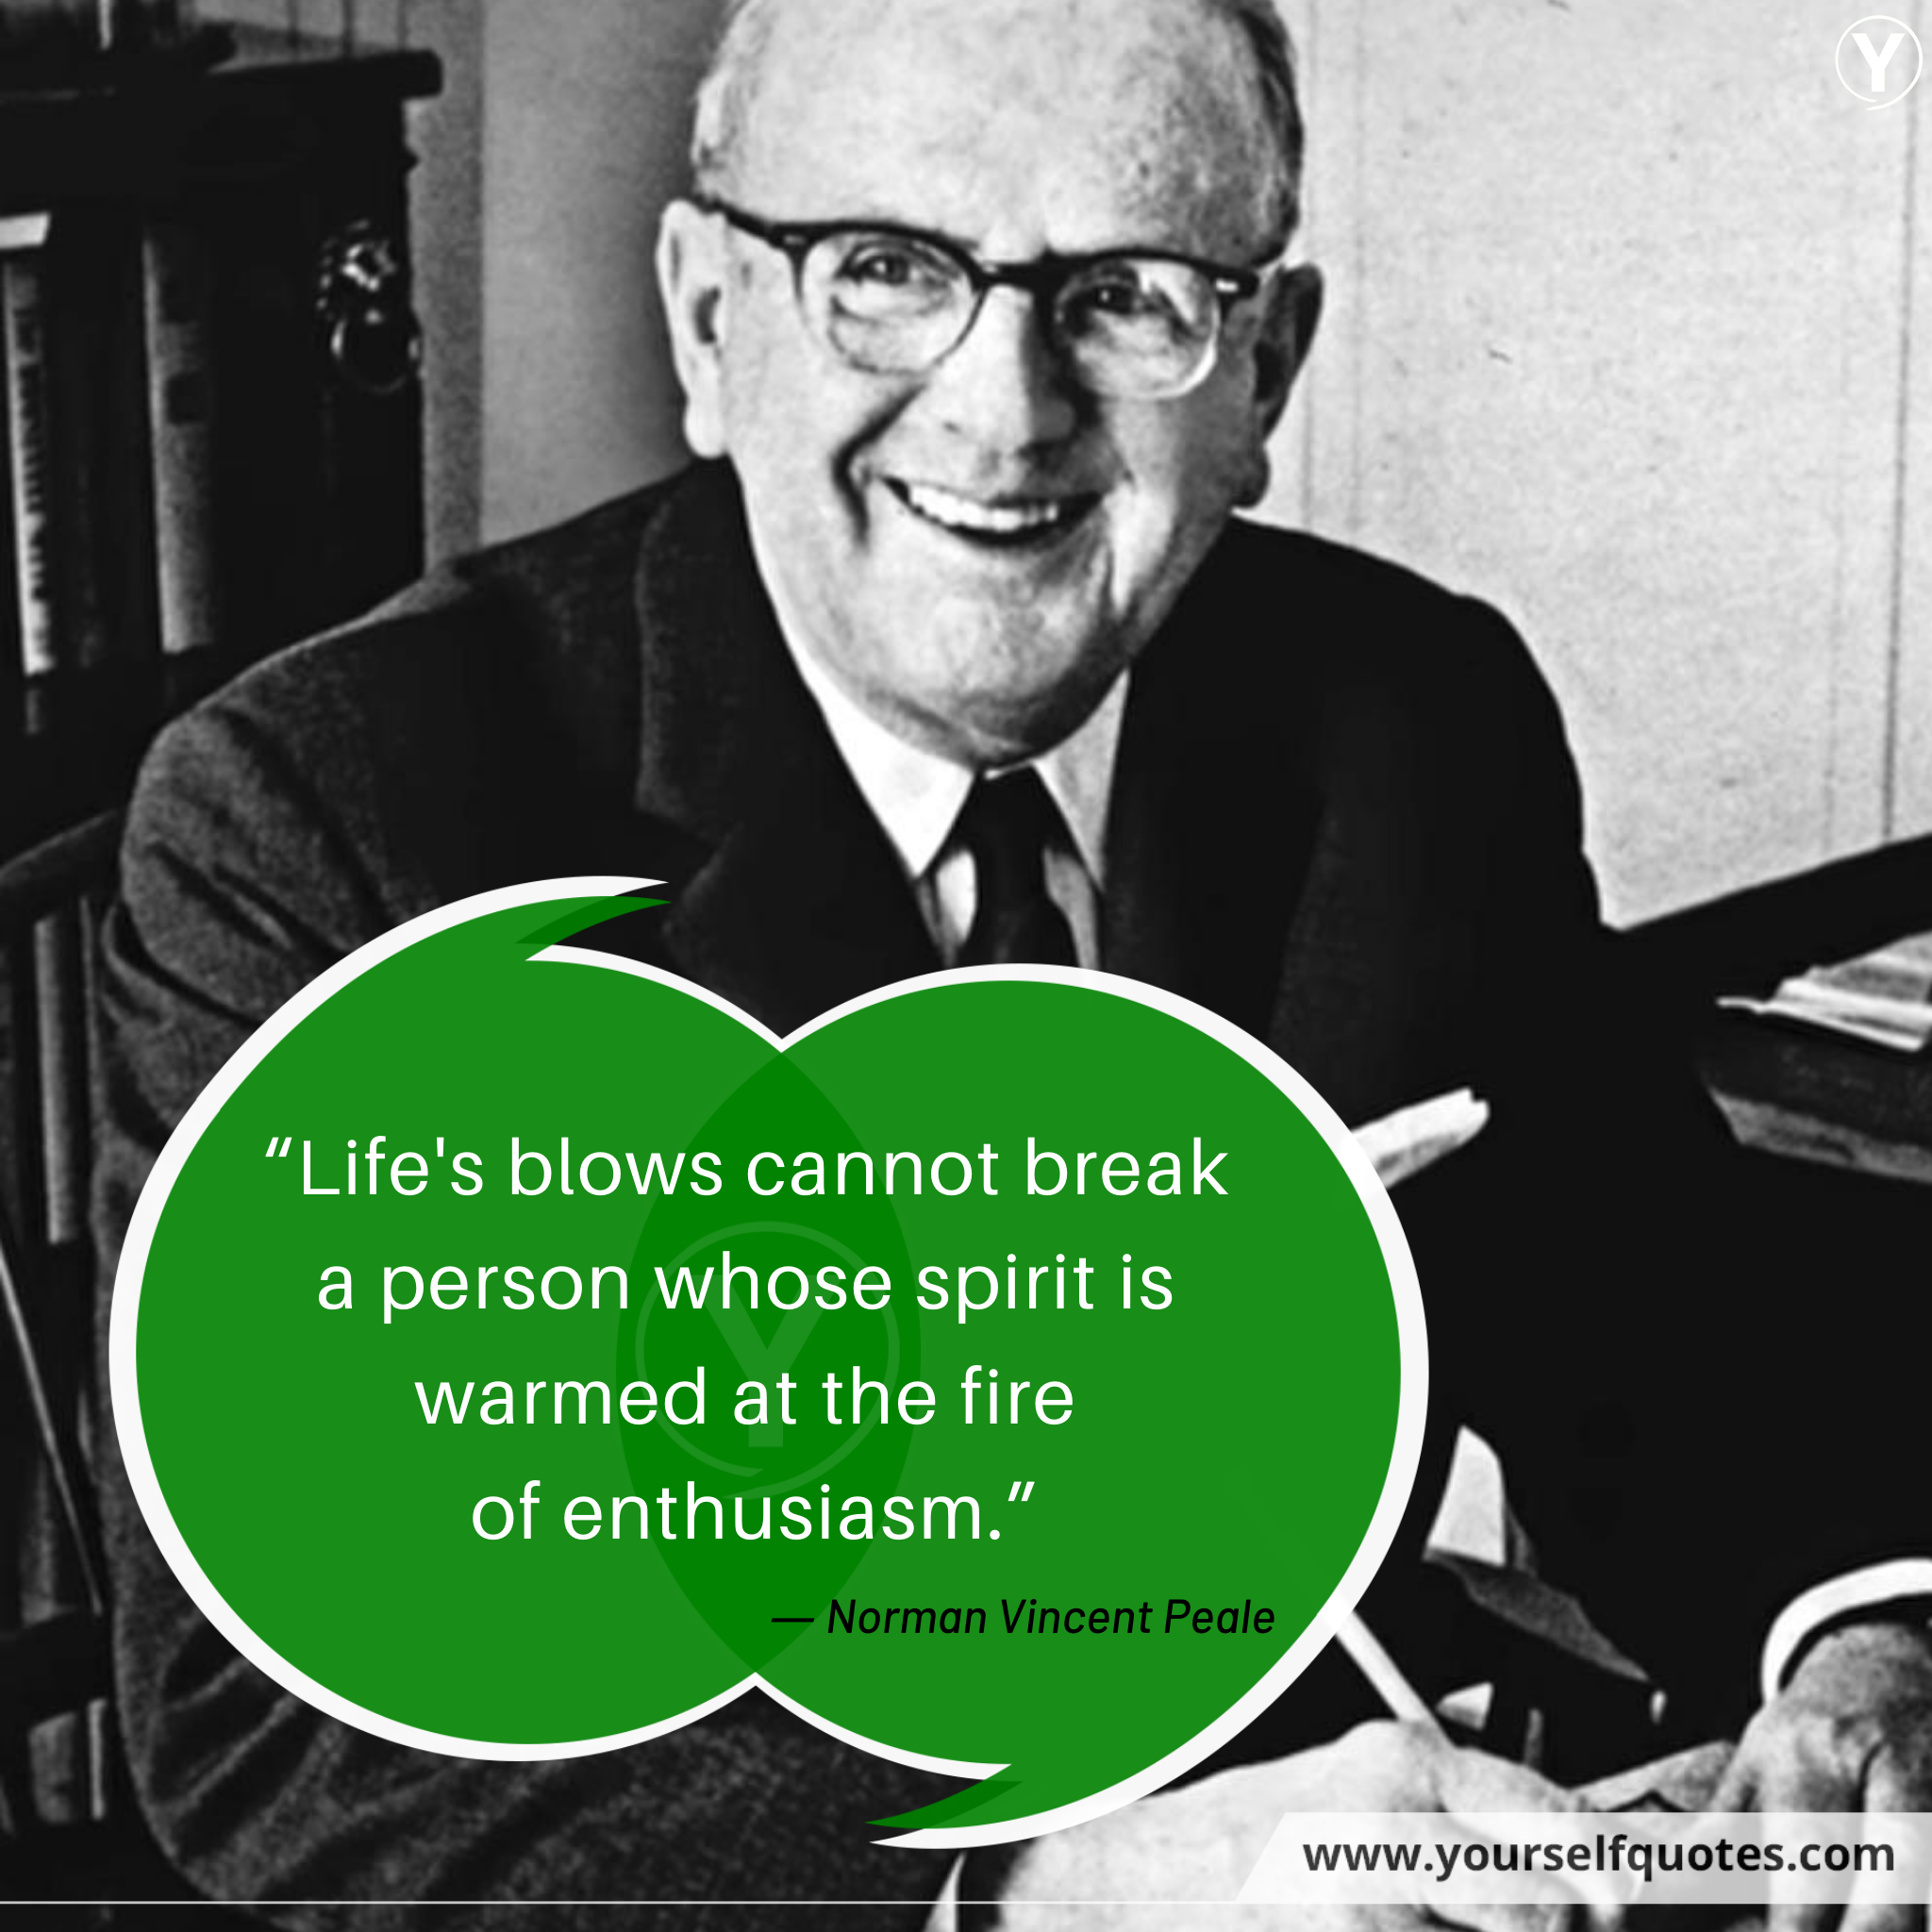 Quotes on Life by Norman Vincent Peale